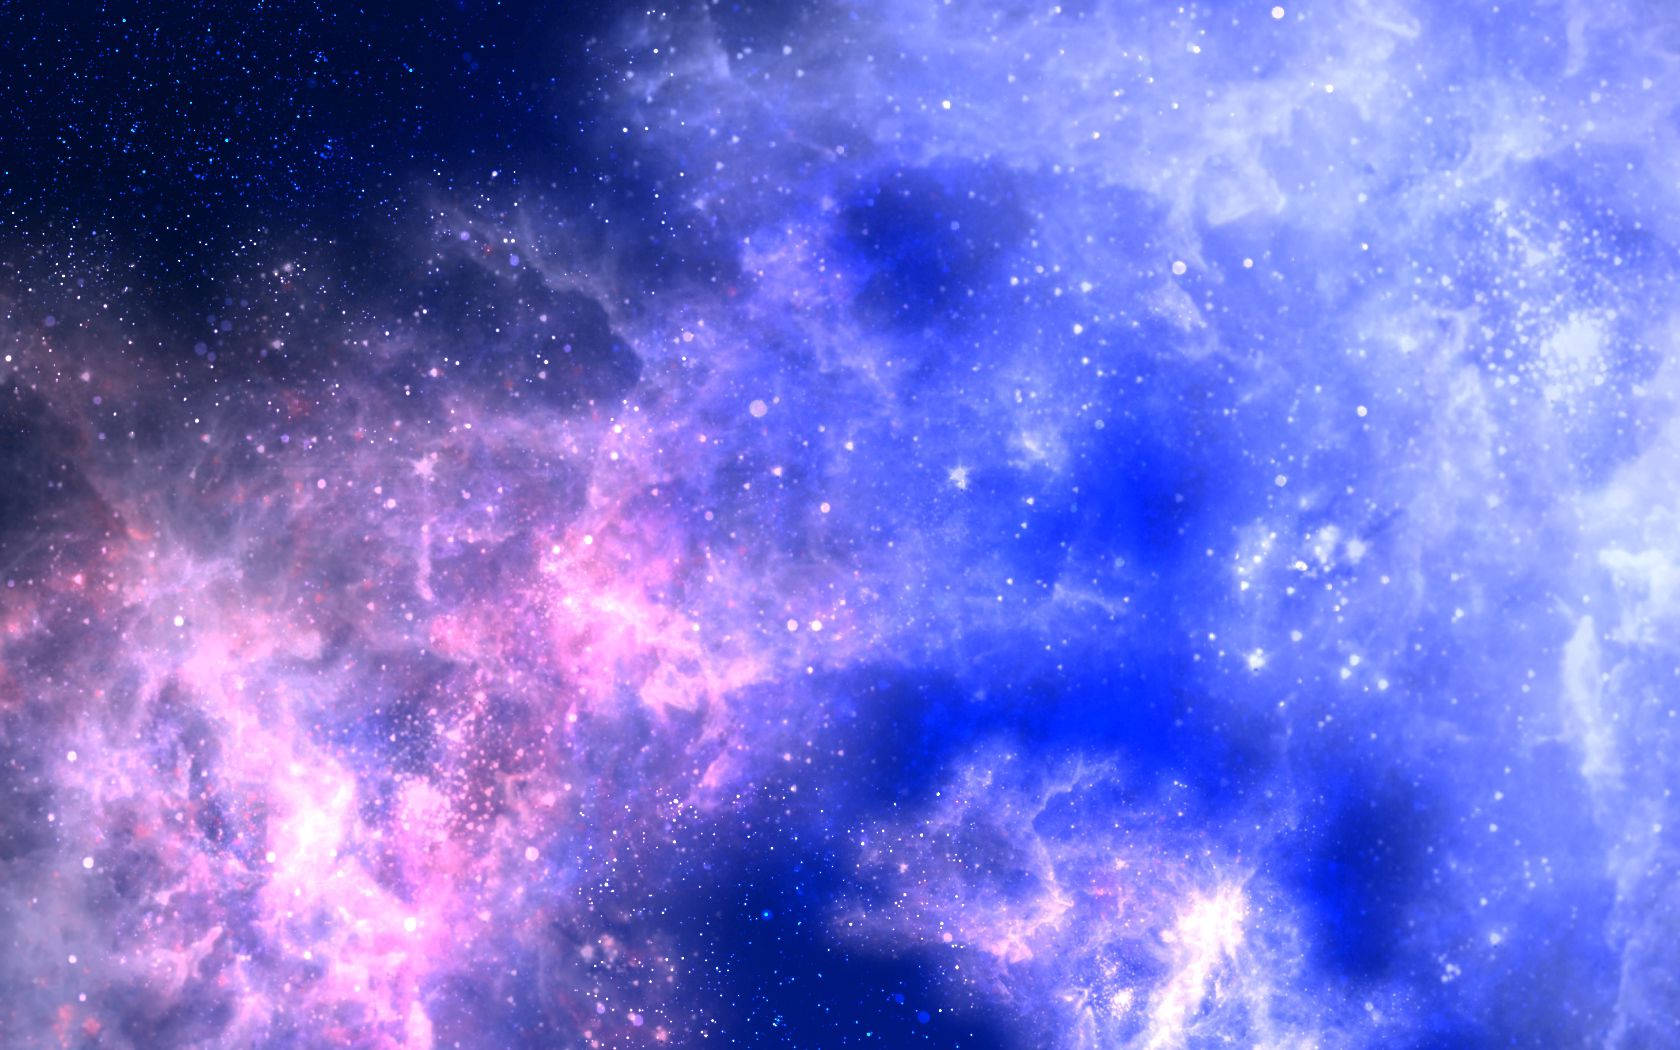 A Blue And Pink Space With Nebulas